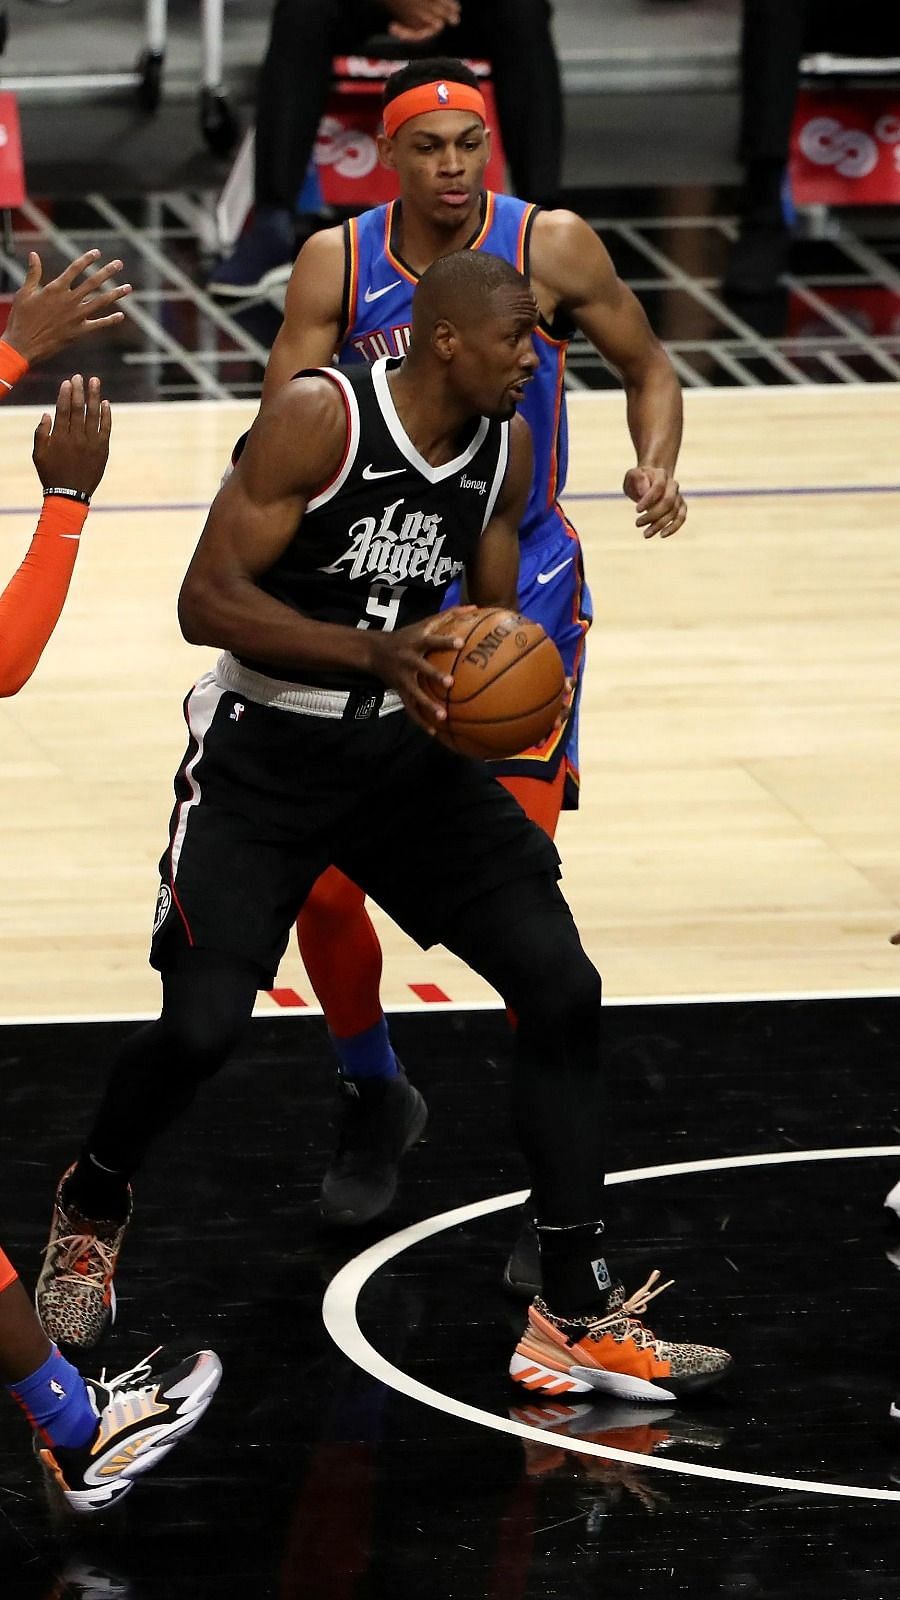 Paul George of the LA Clippers handles the ball against the Dallas